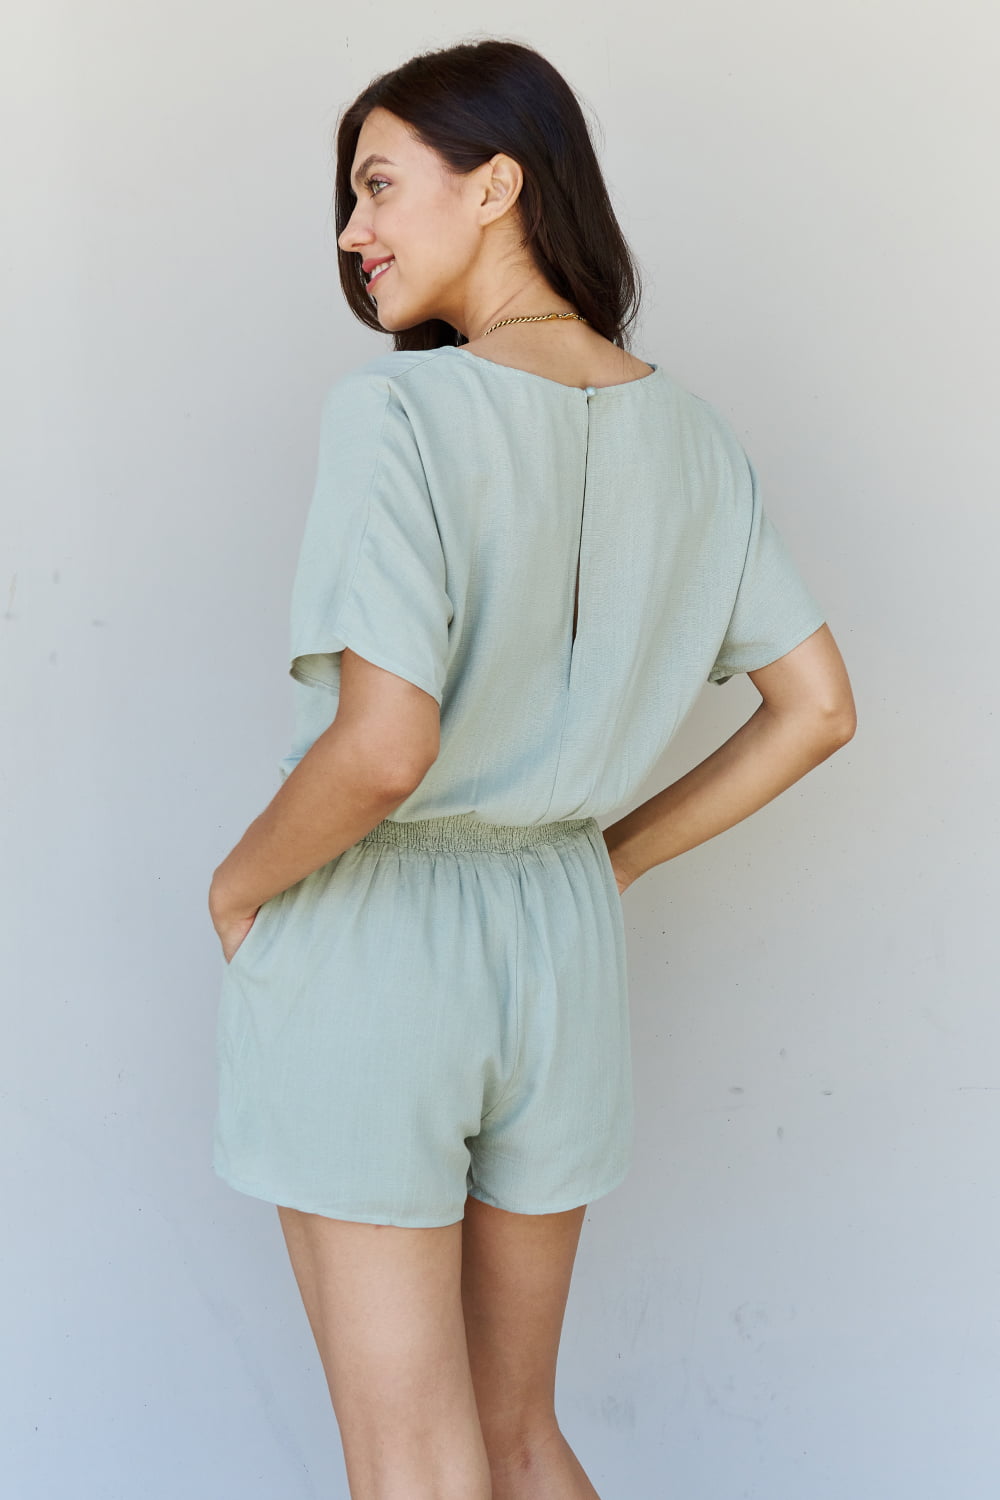 HEYSON Easy Going Front Pleated Romper in Cool Matcha